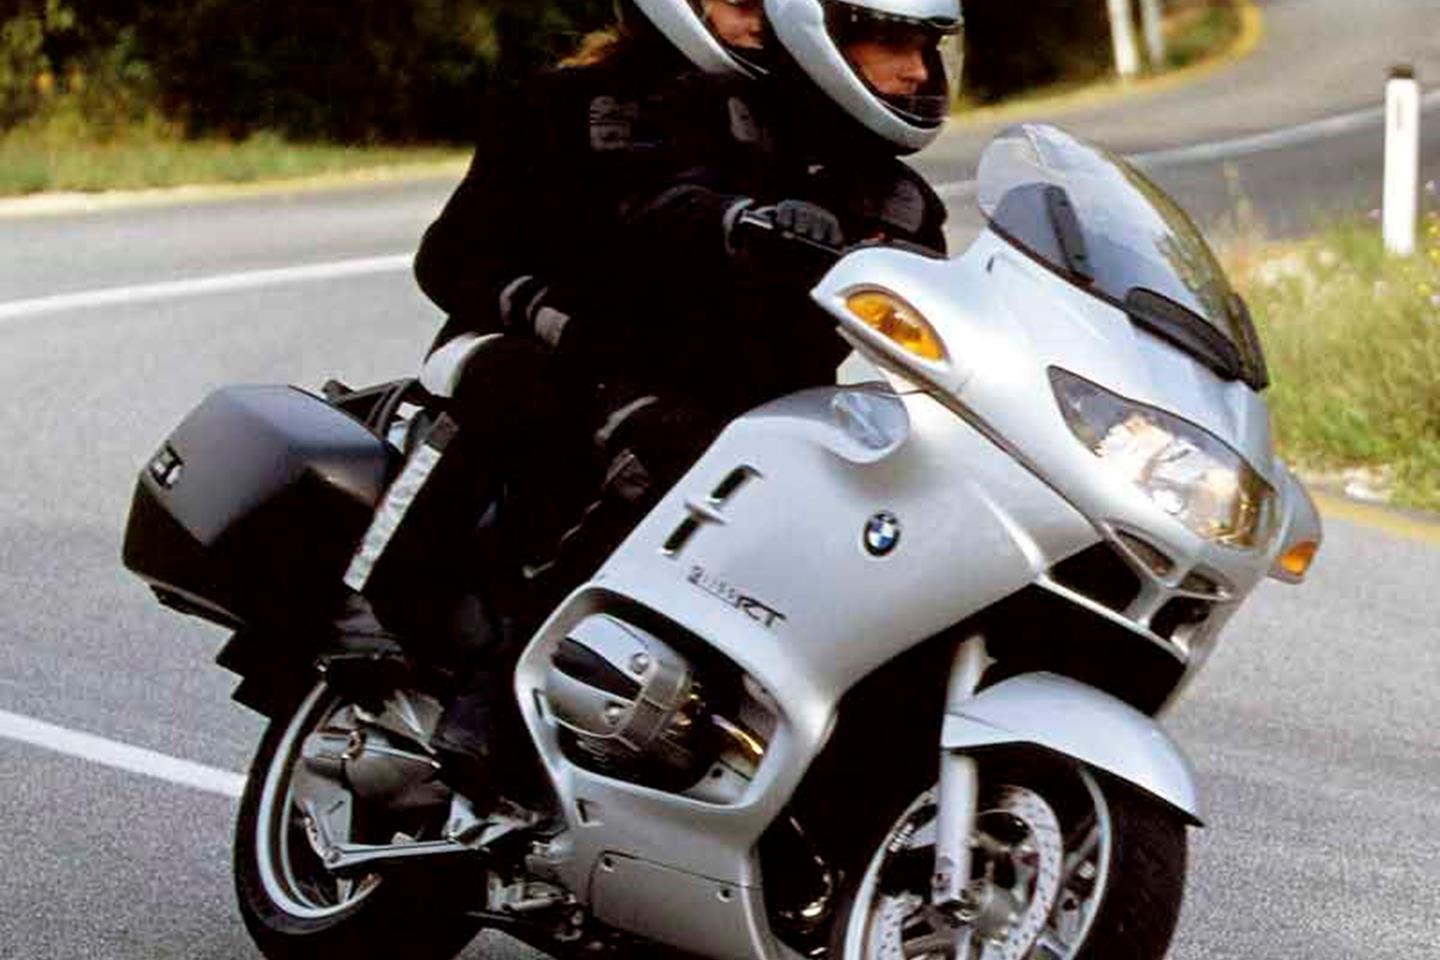 BMW R1150RT (2001-2005) Review | Speed, Specs & Prices